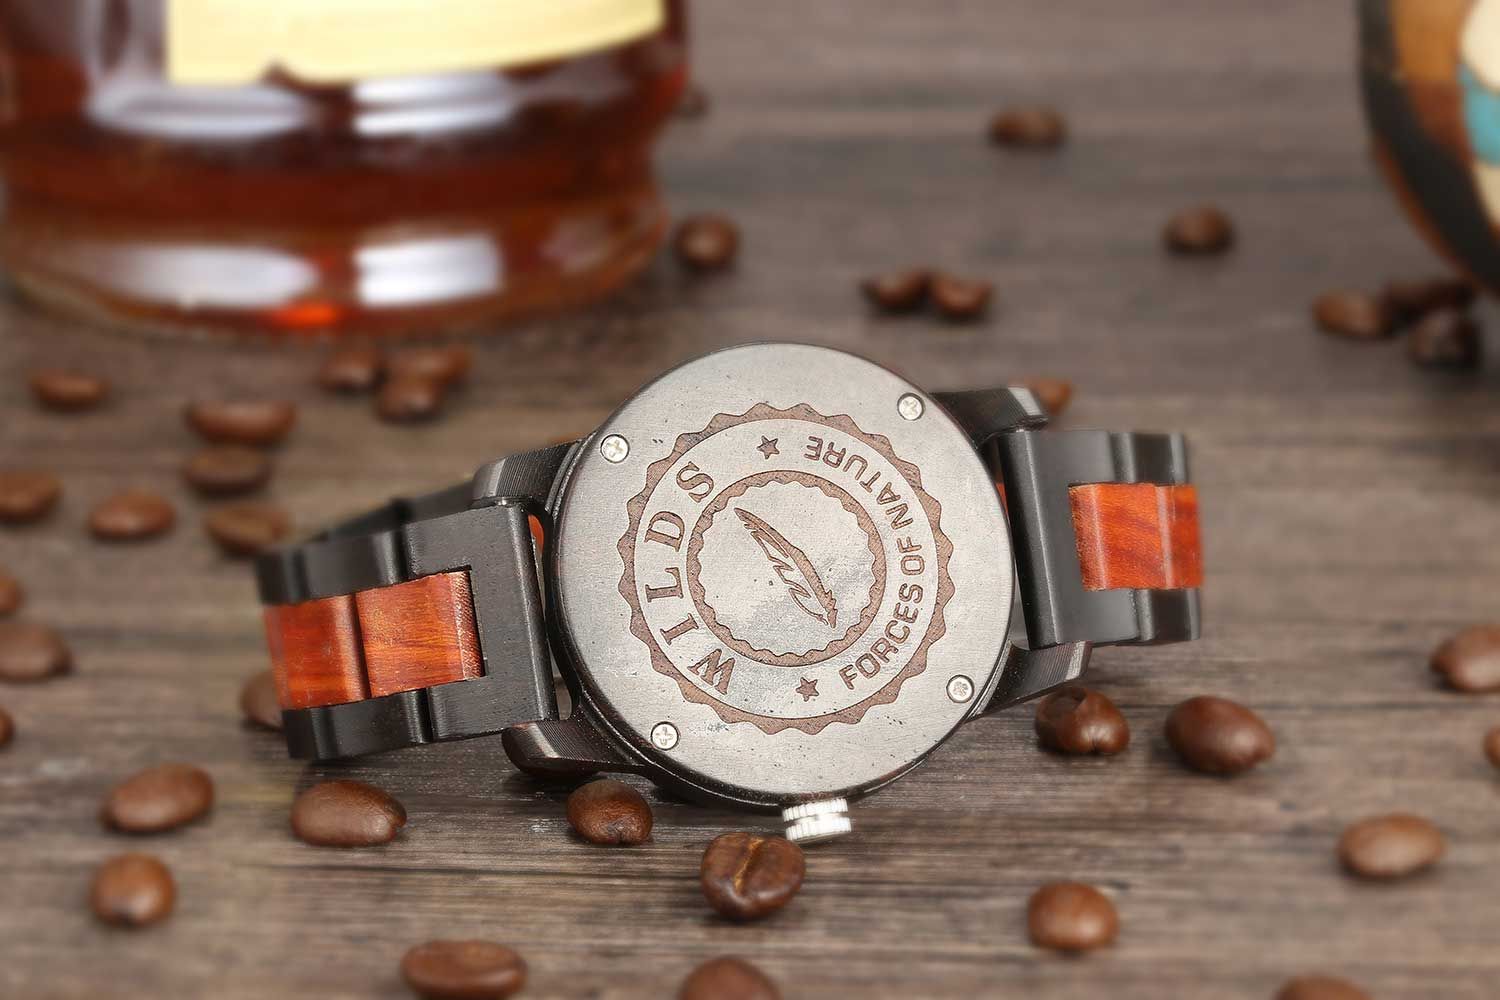 MCHPI Store Men's Handcrafted Engraving Ebony & Rose Wood Watch - Best Gift Idea!